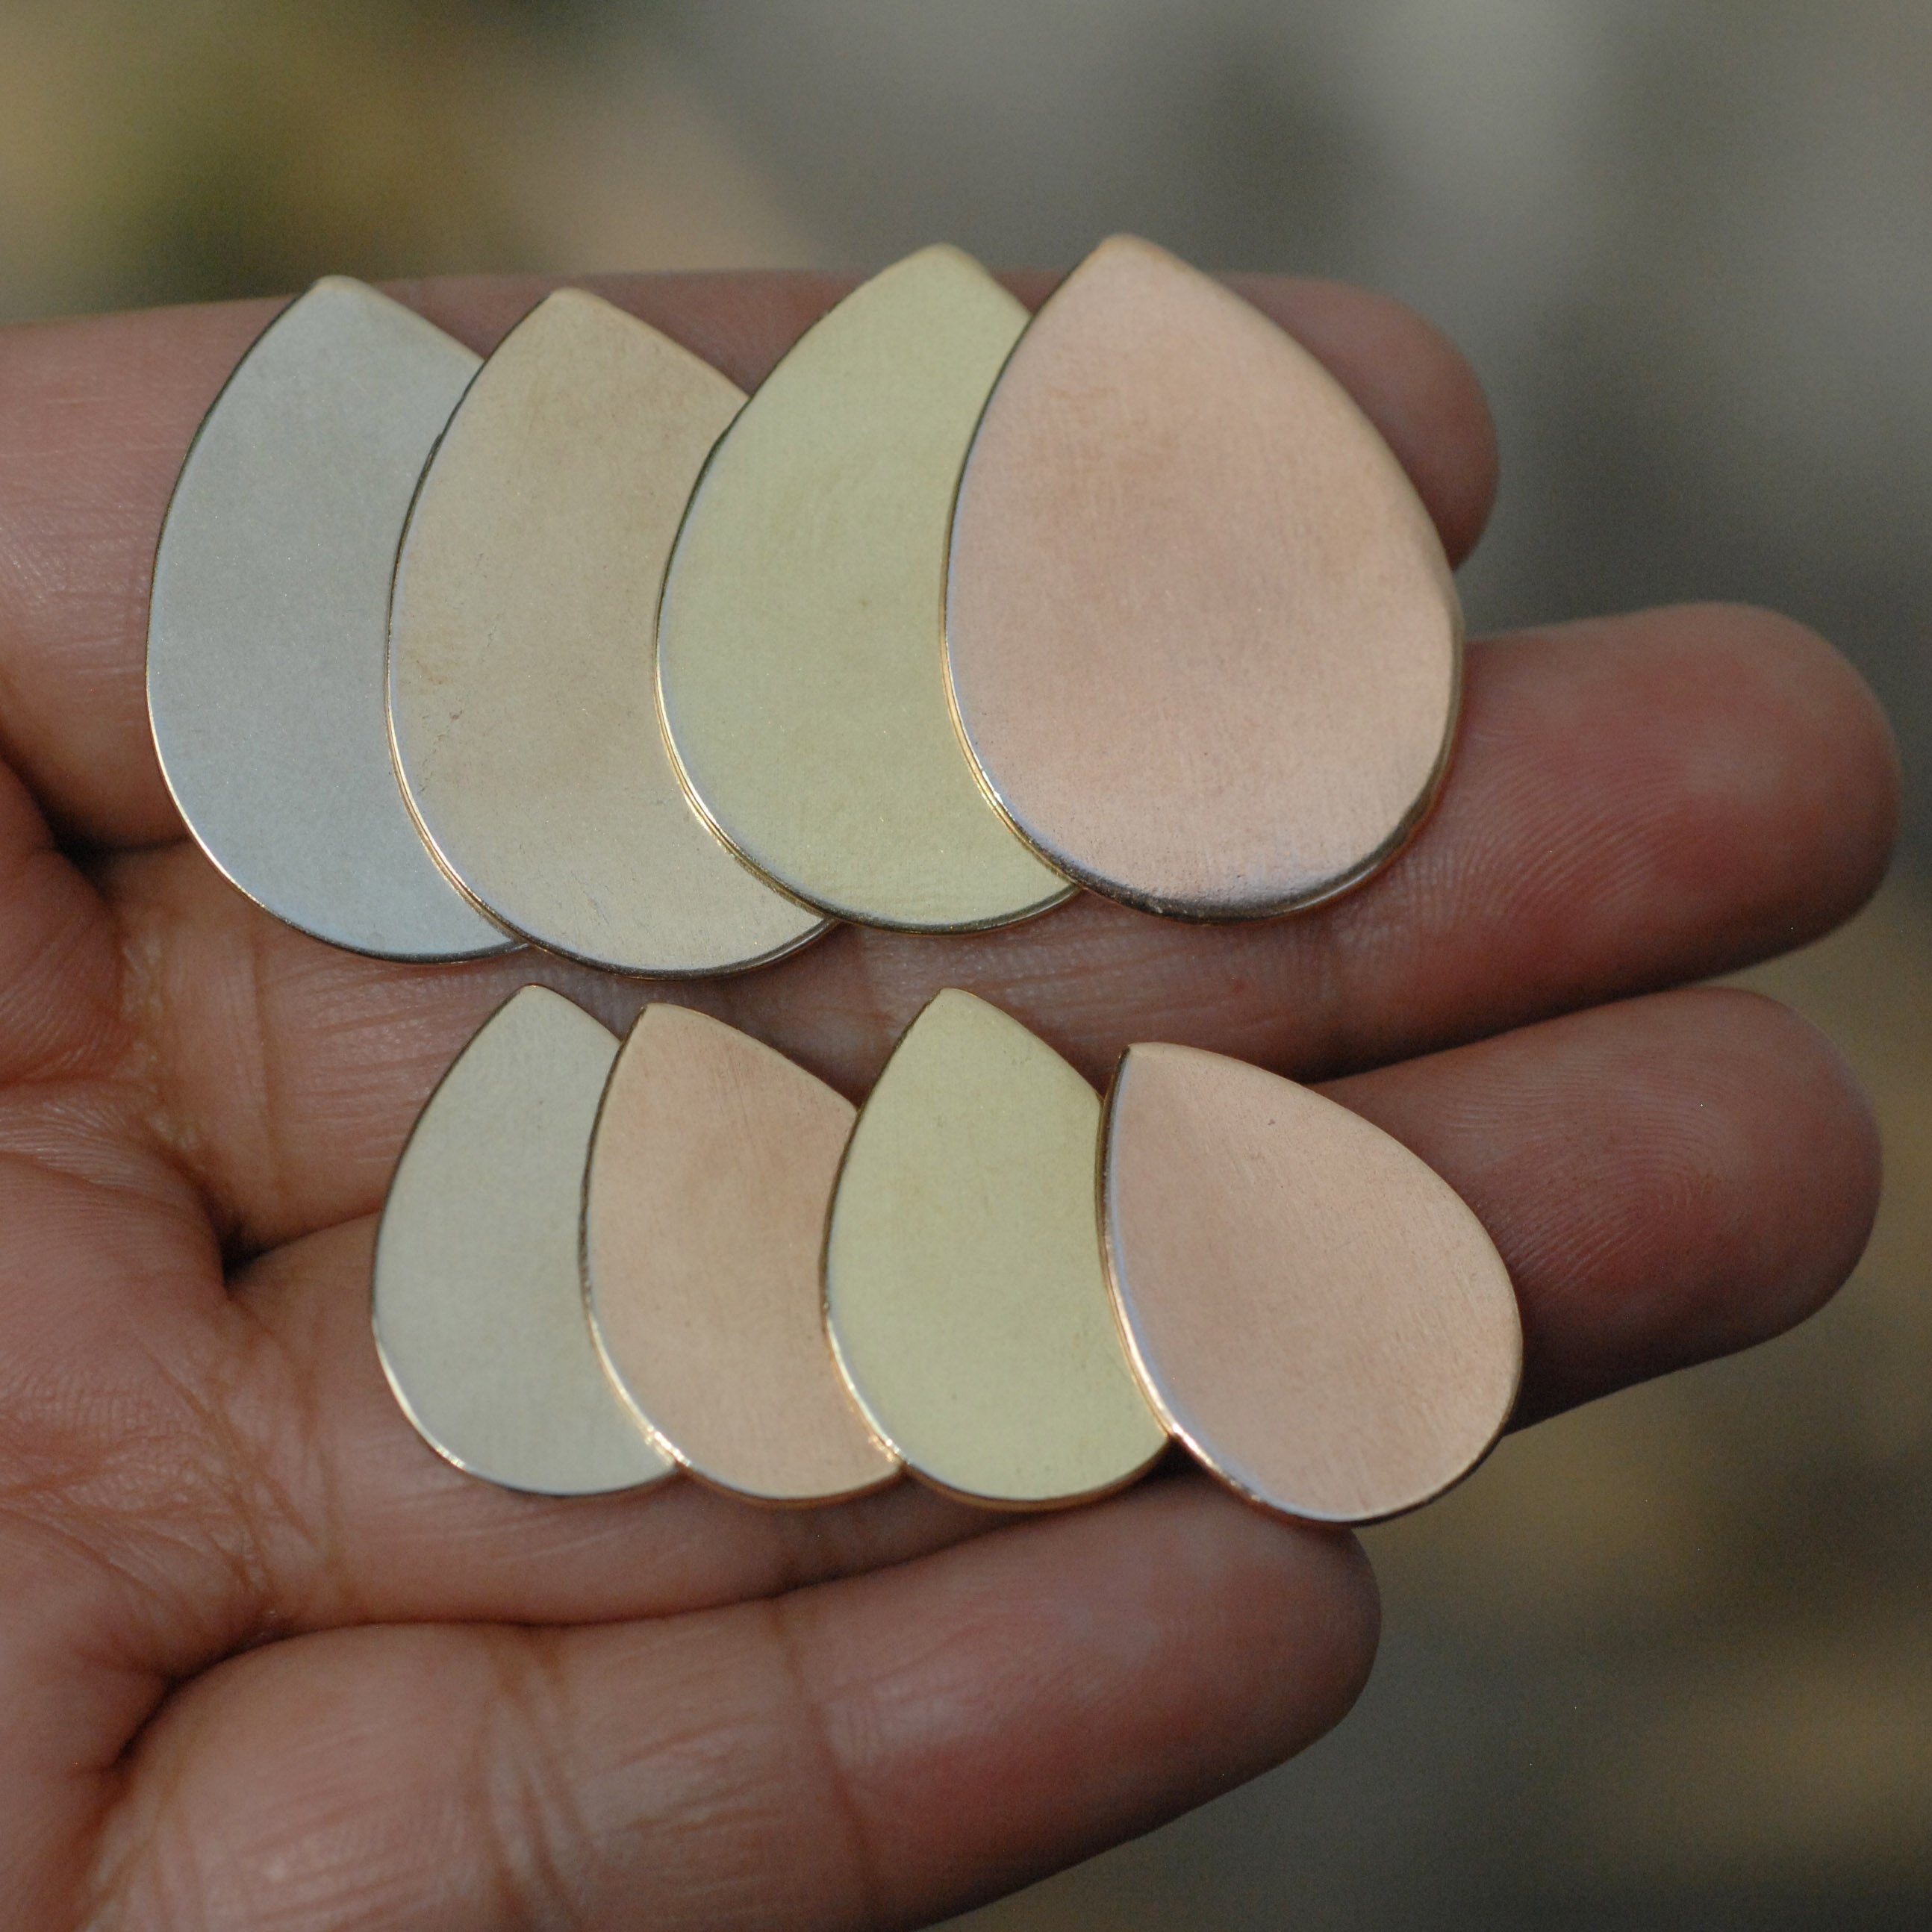 Teardrop shapes 20mm x 26mm 20g metal blanks - Jewelry Supplies - 4 pieces